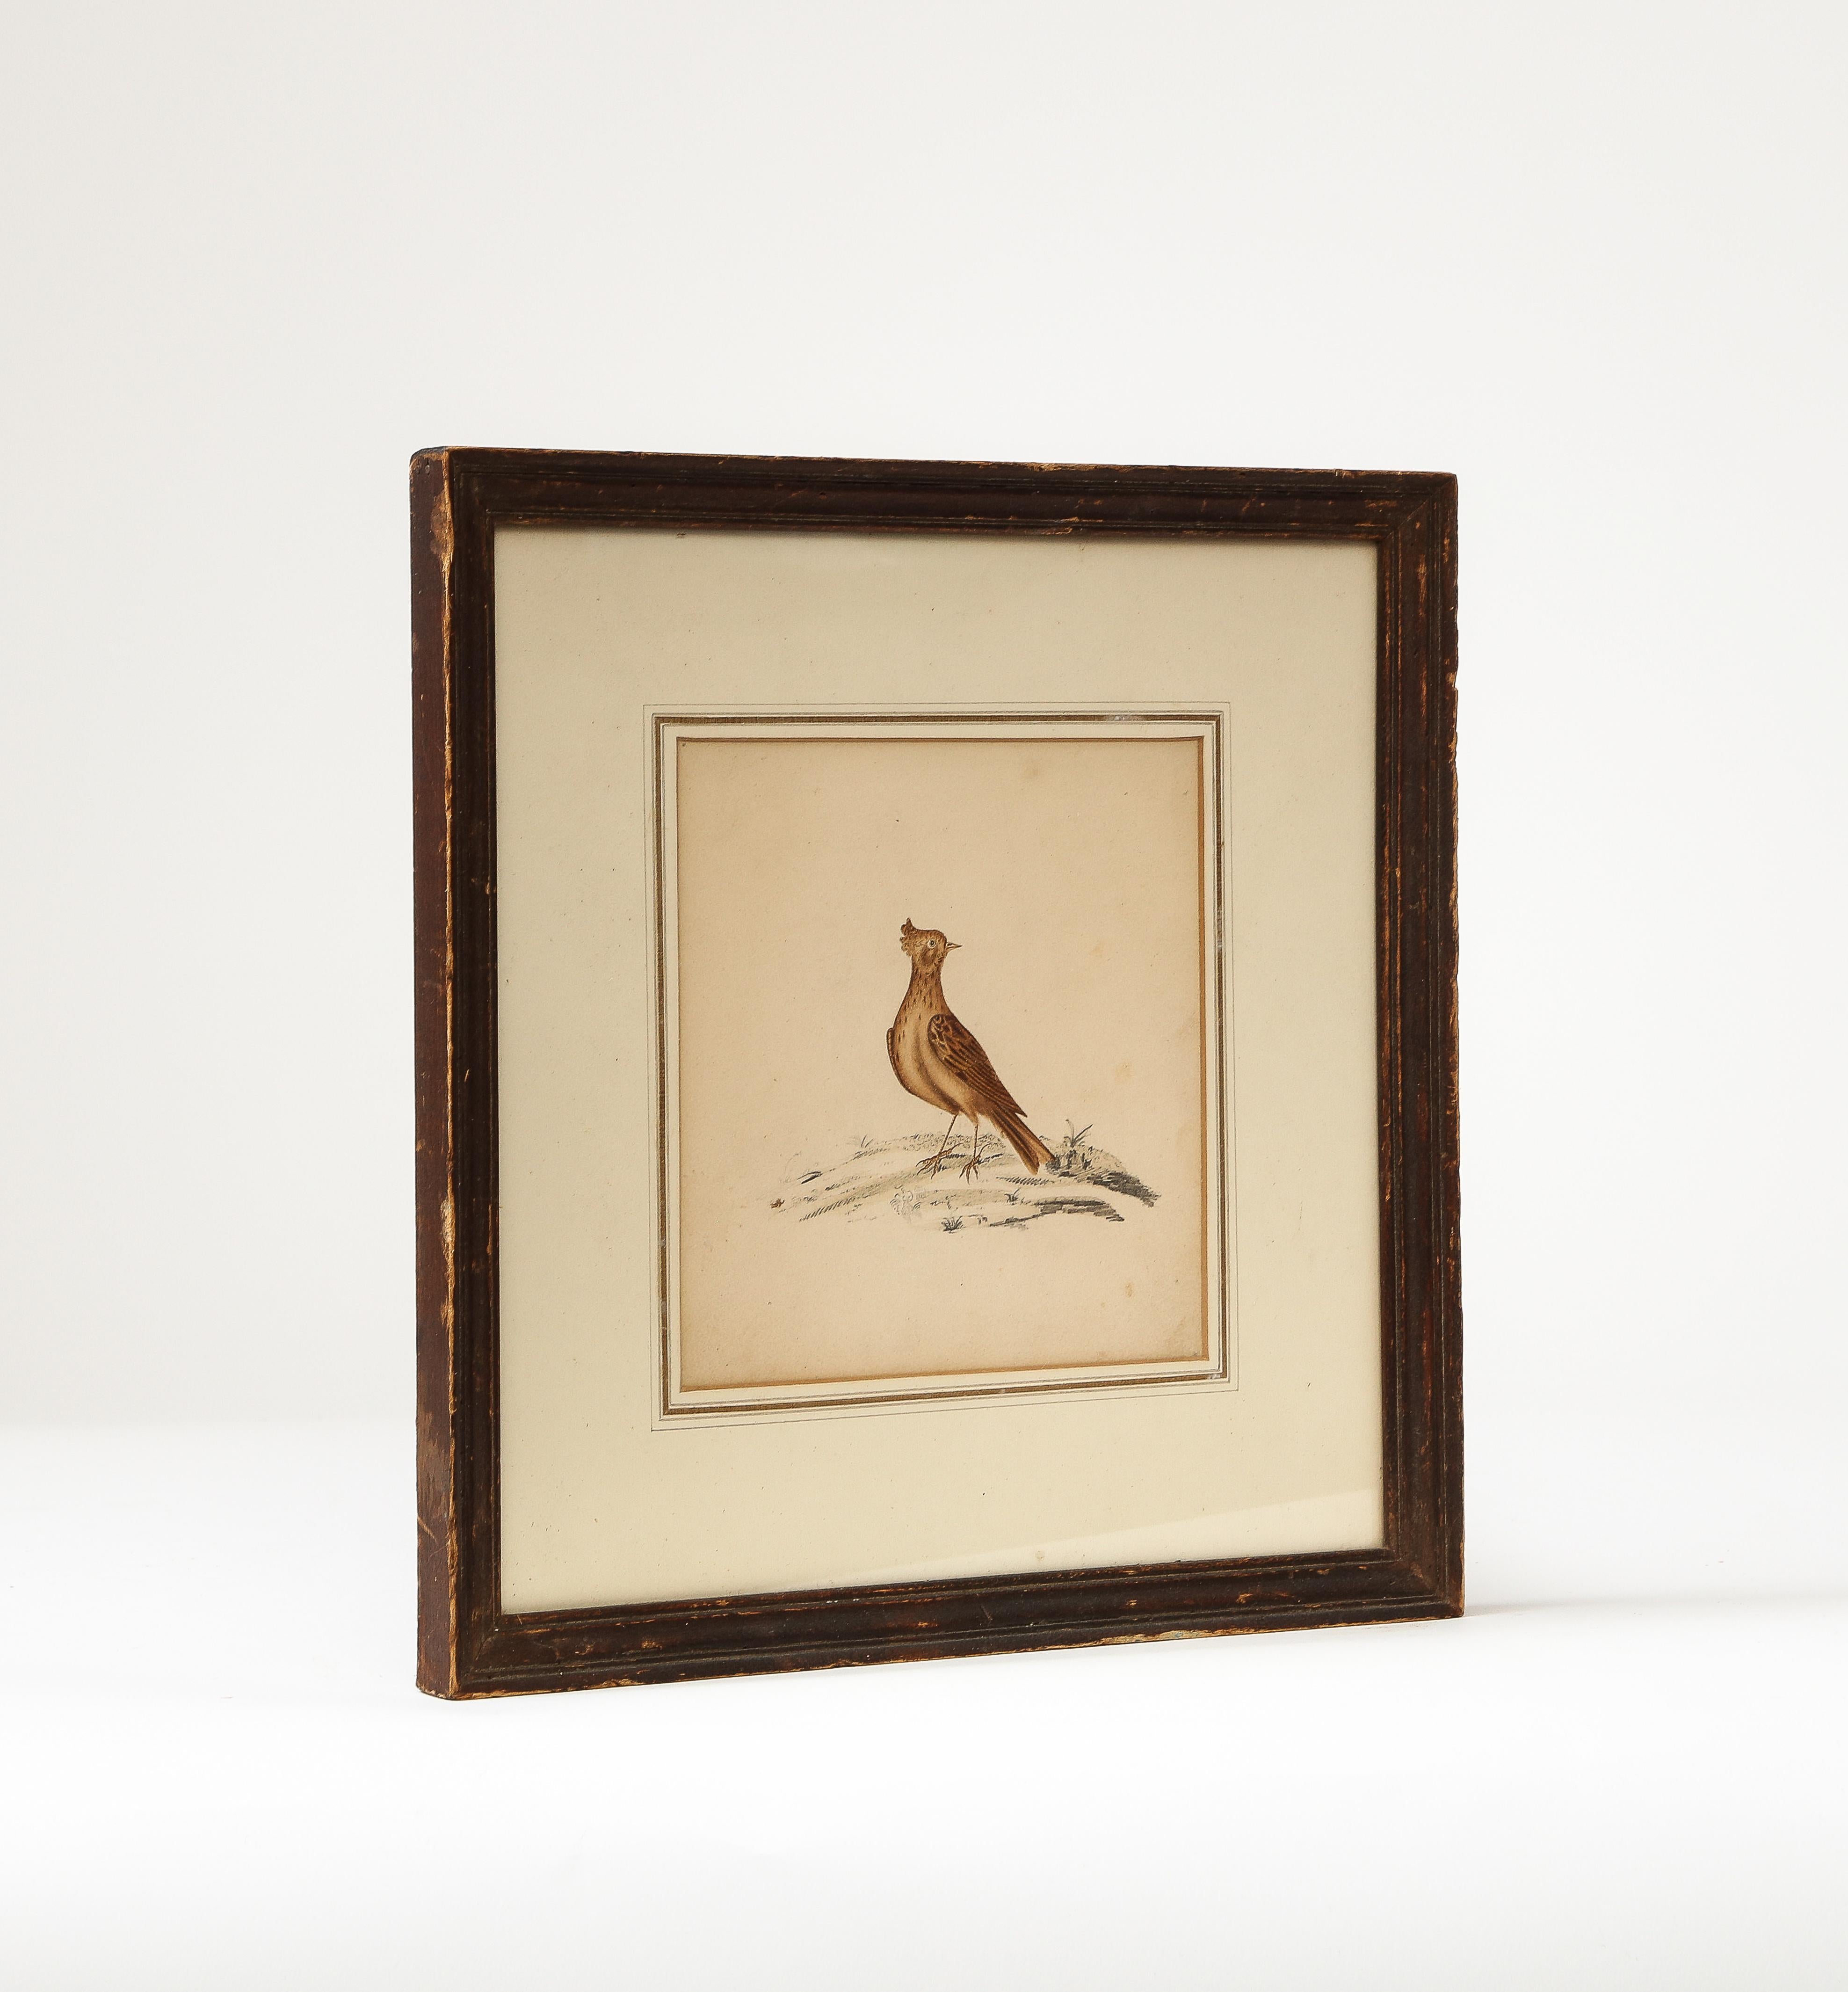 Lithograph of a skylark with a patinated wood frame.